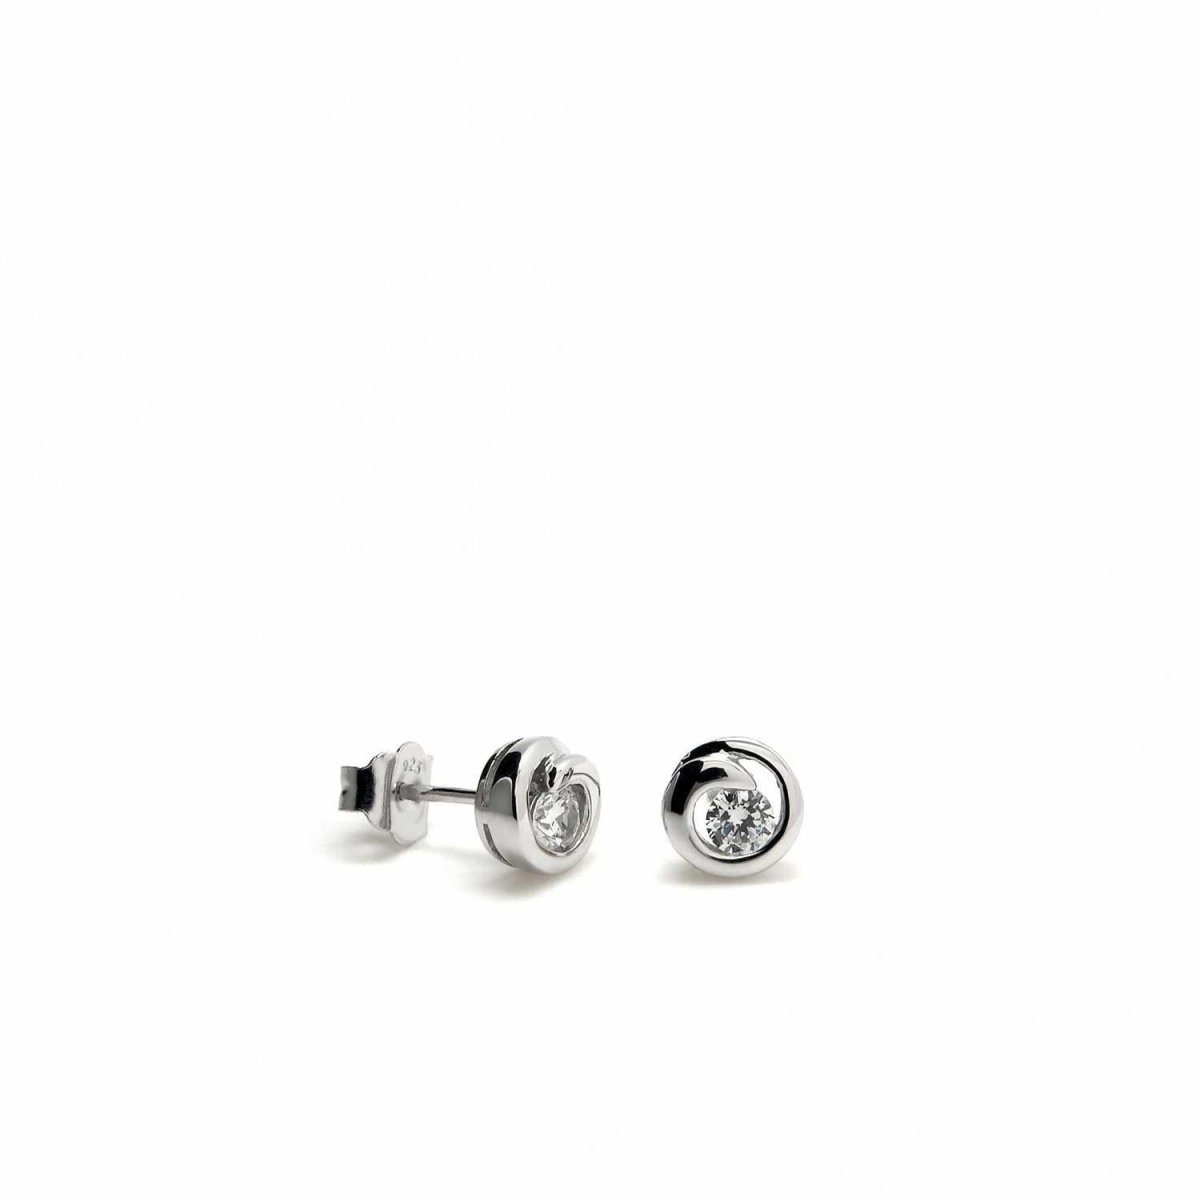 Earrings - Earrings button helix design with central zirconia